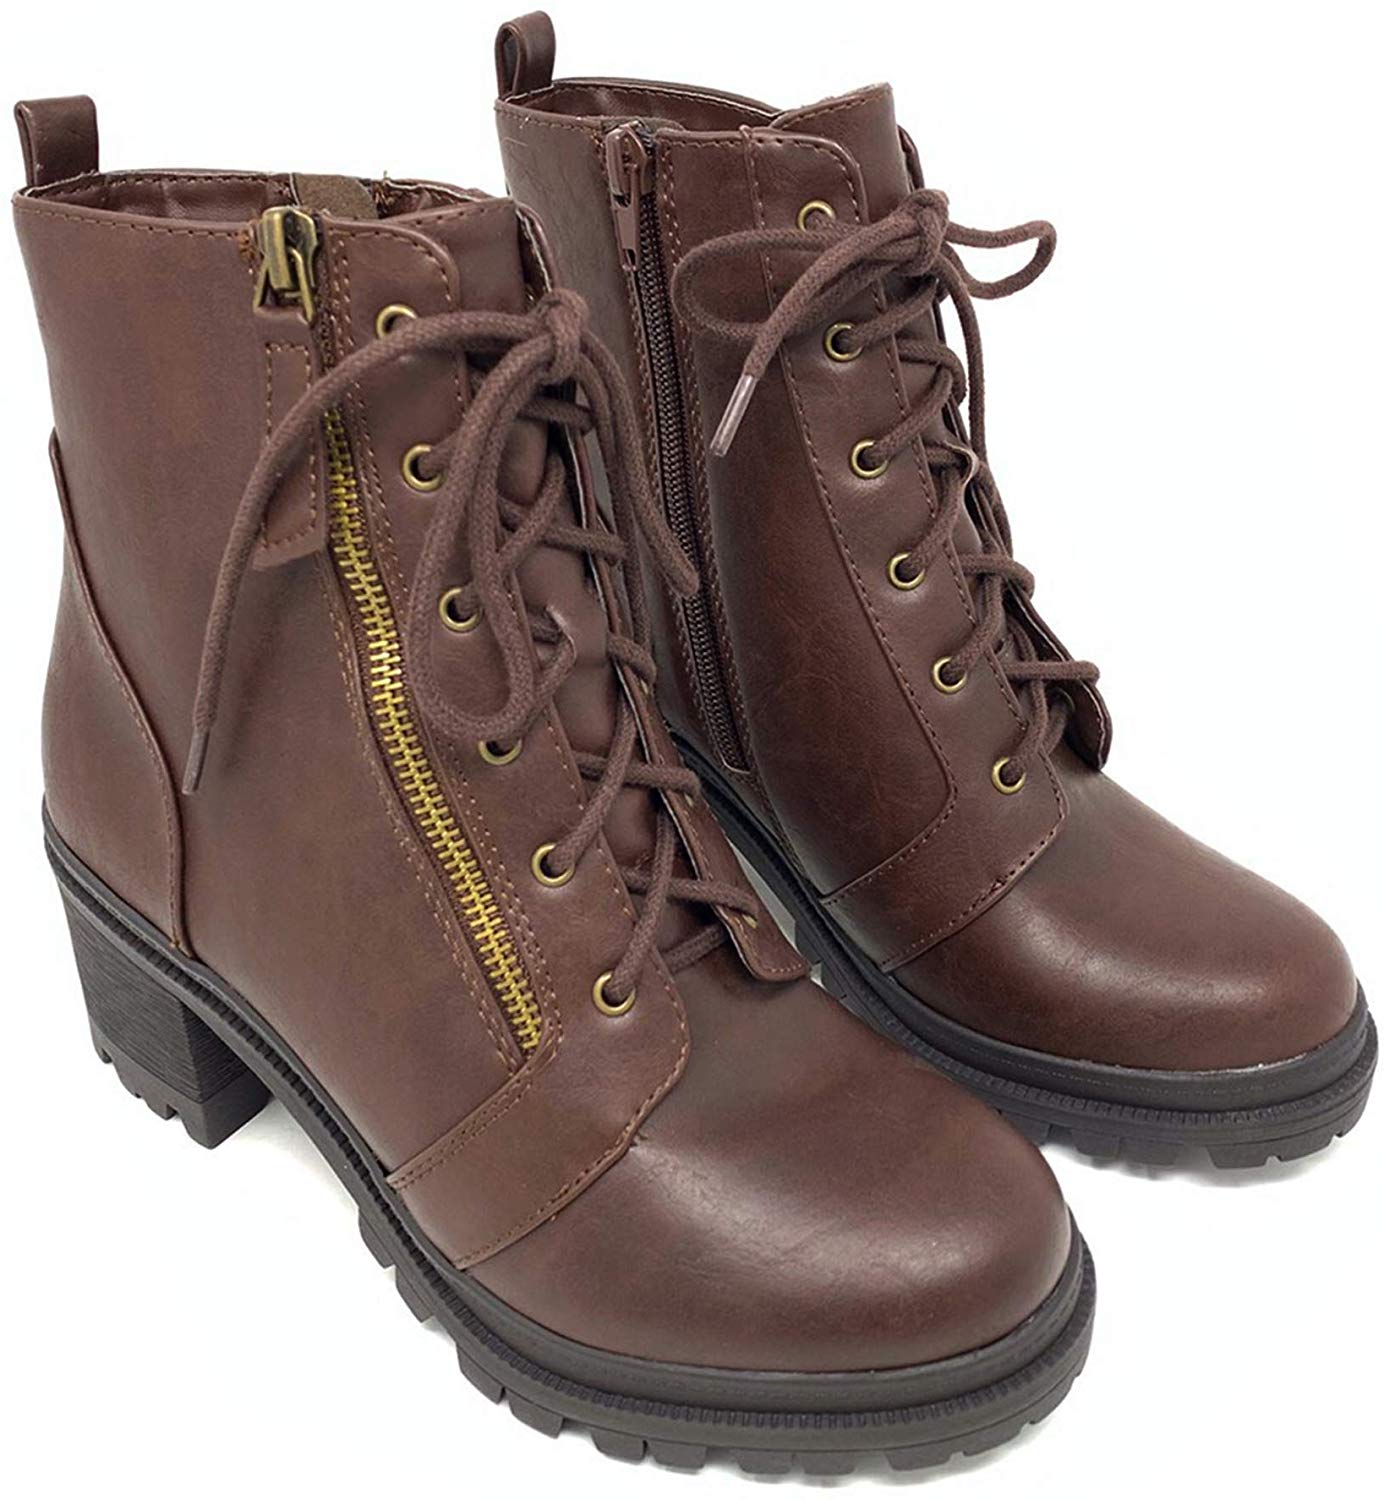 Soda Boots Women's Brown Low Faux Leather Chunky Heel Ankle Booties | eBay